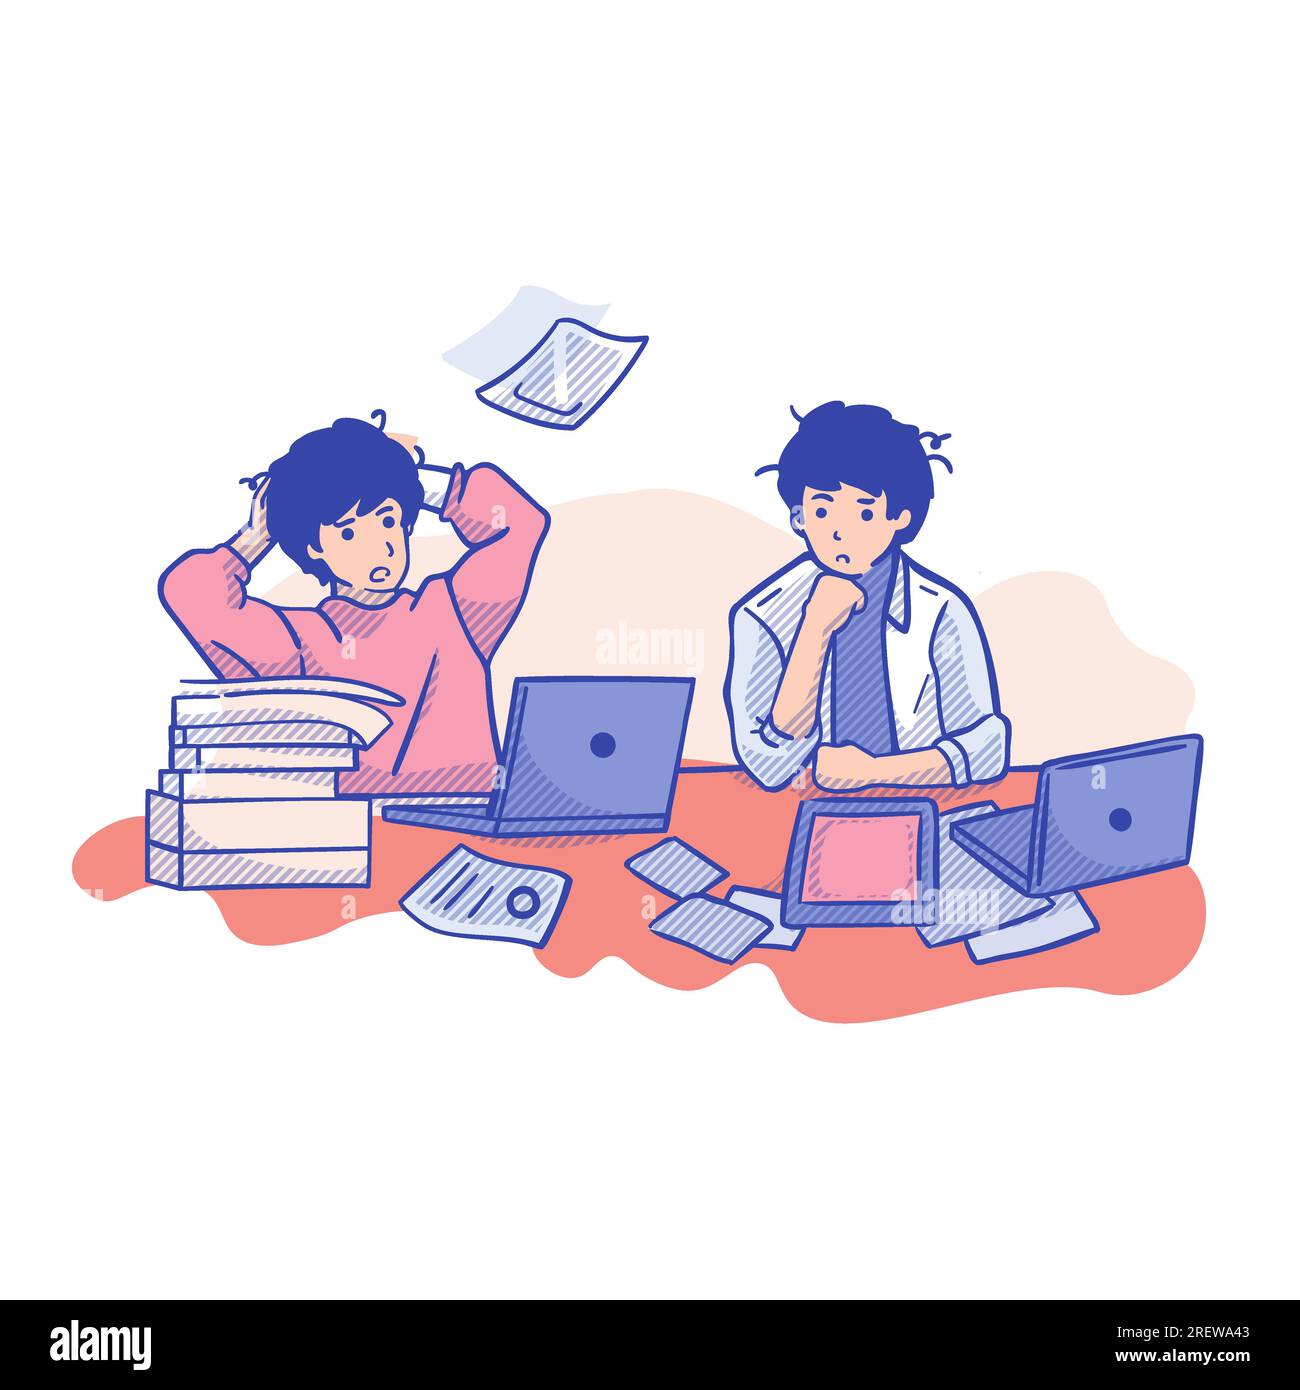 man, cartoon, business, stress, tired, illustration, Tired man and woman sitting at the desk with laptop and documents. Flat style vector illustration Stock Vector